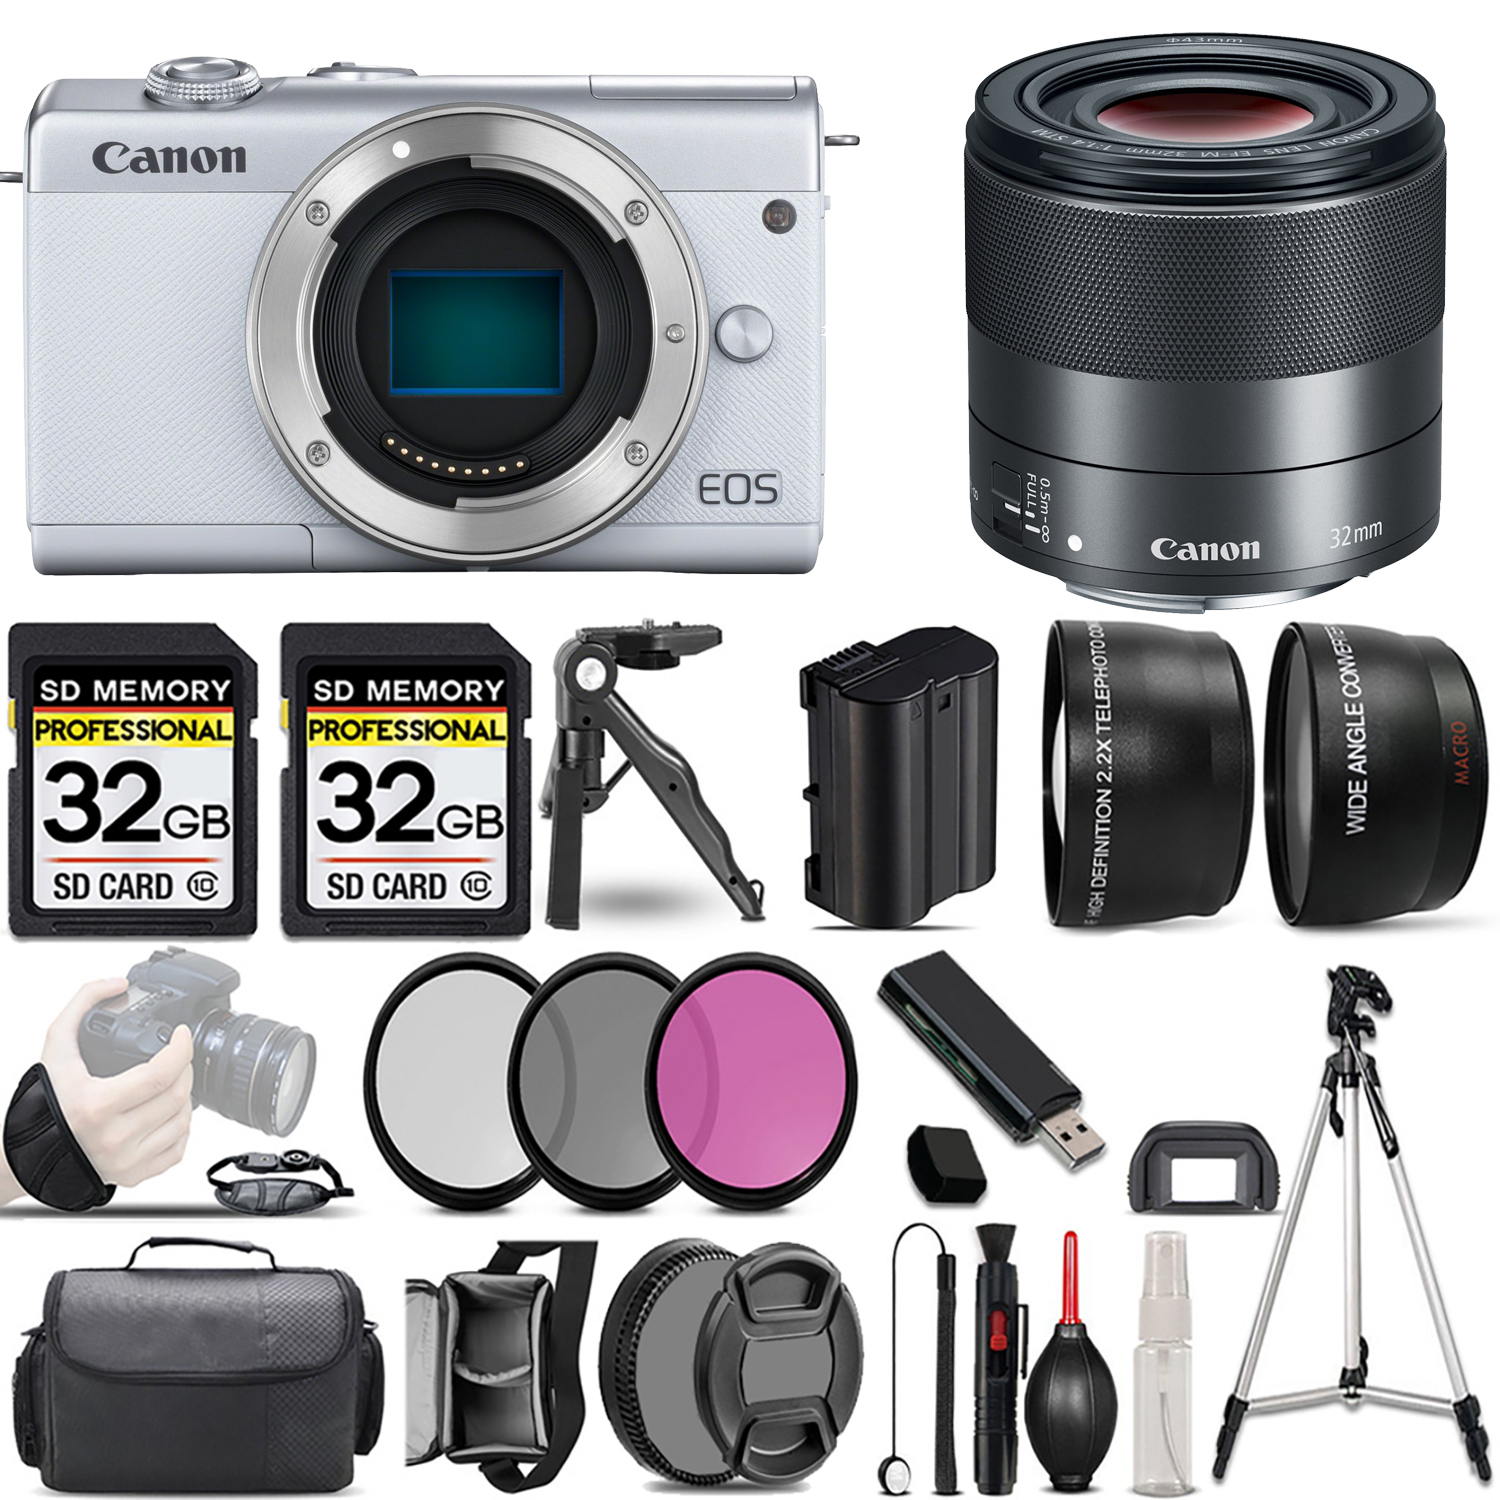 EOS M200  Camera (White) + 32mm f/1.4 STM Lens + 3 Piece Filter Set + 64GB *FREE SHIPPING*